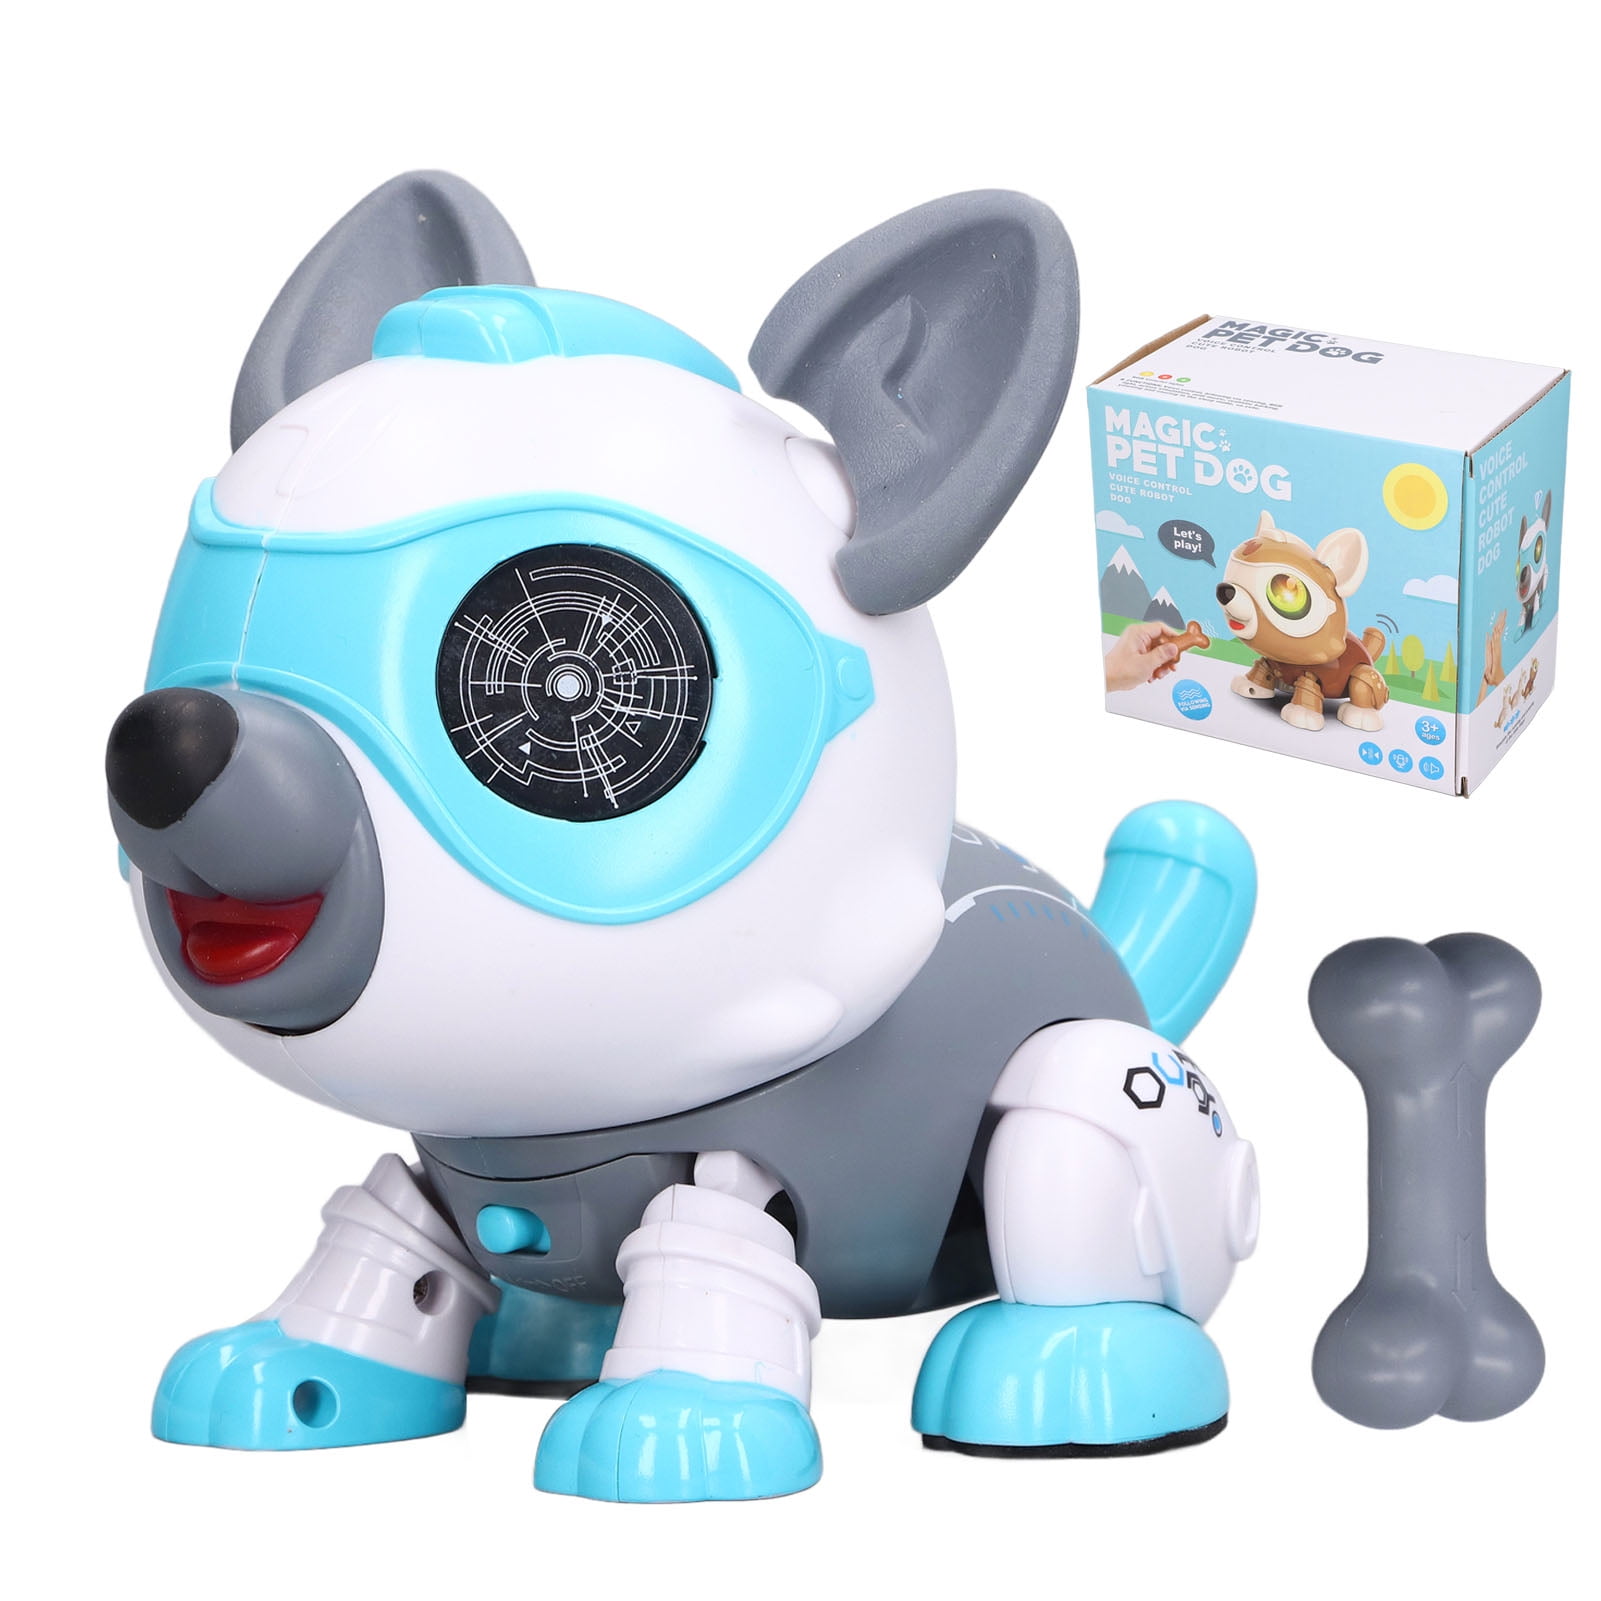 Intelligent Touch Remote Control Robot Pet Dog with Sound & Light Kids Toy 